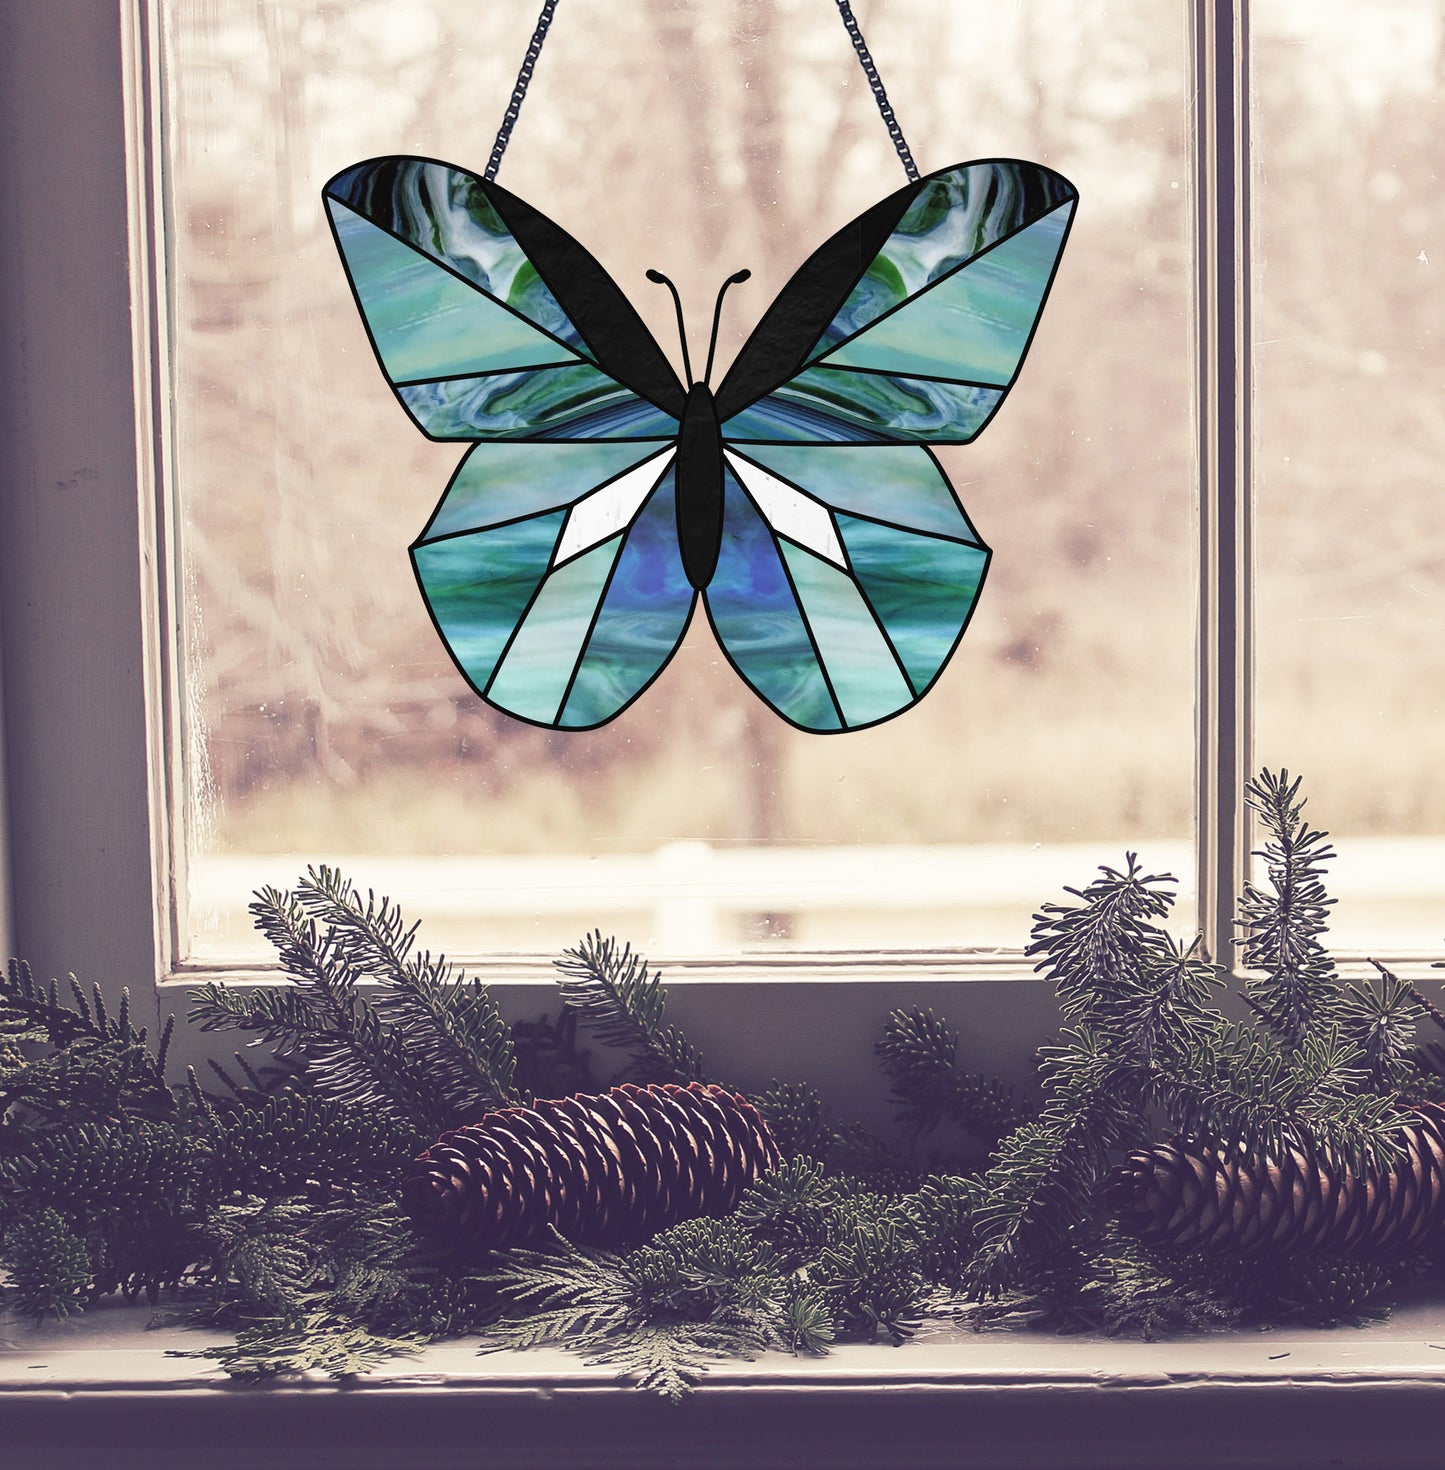 Beginner stained glass pattern for a butterfly, instant PDF download, shown hanging in a window with pine cones